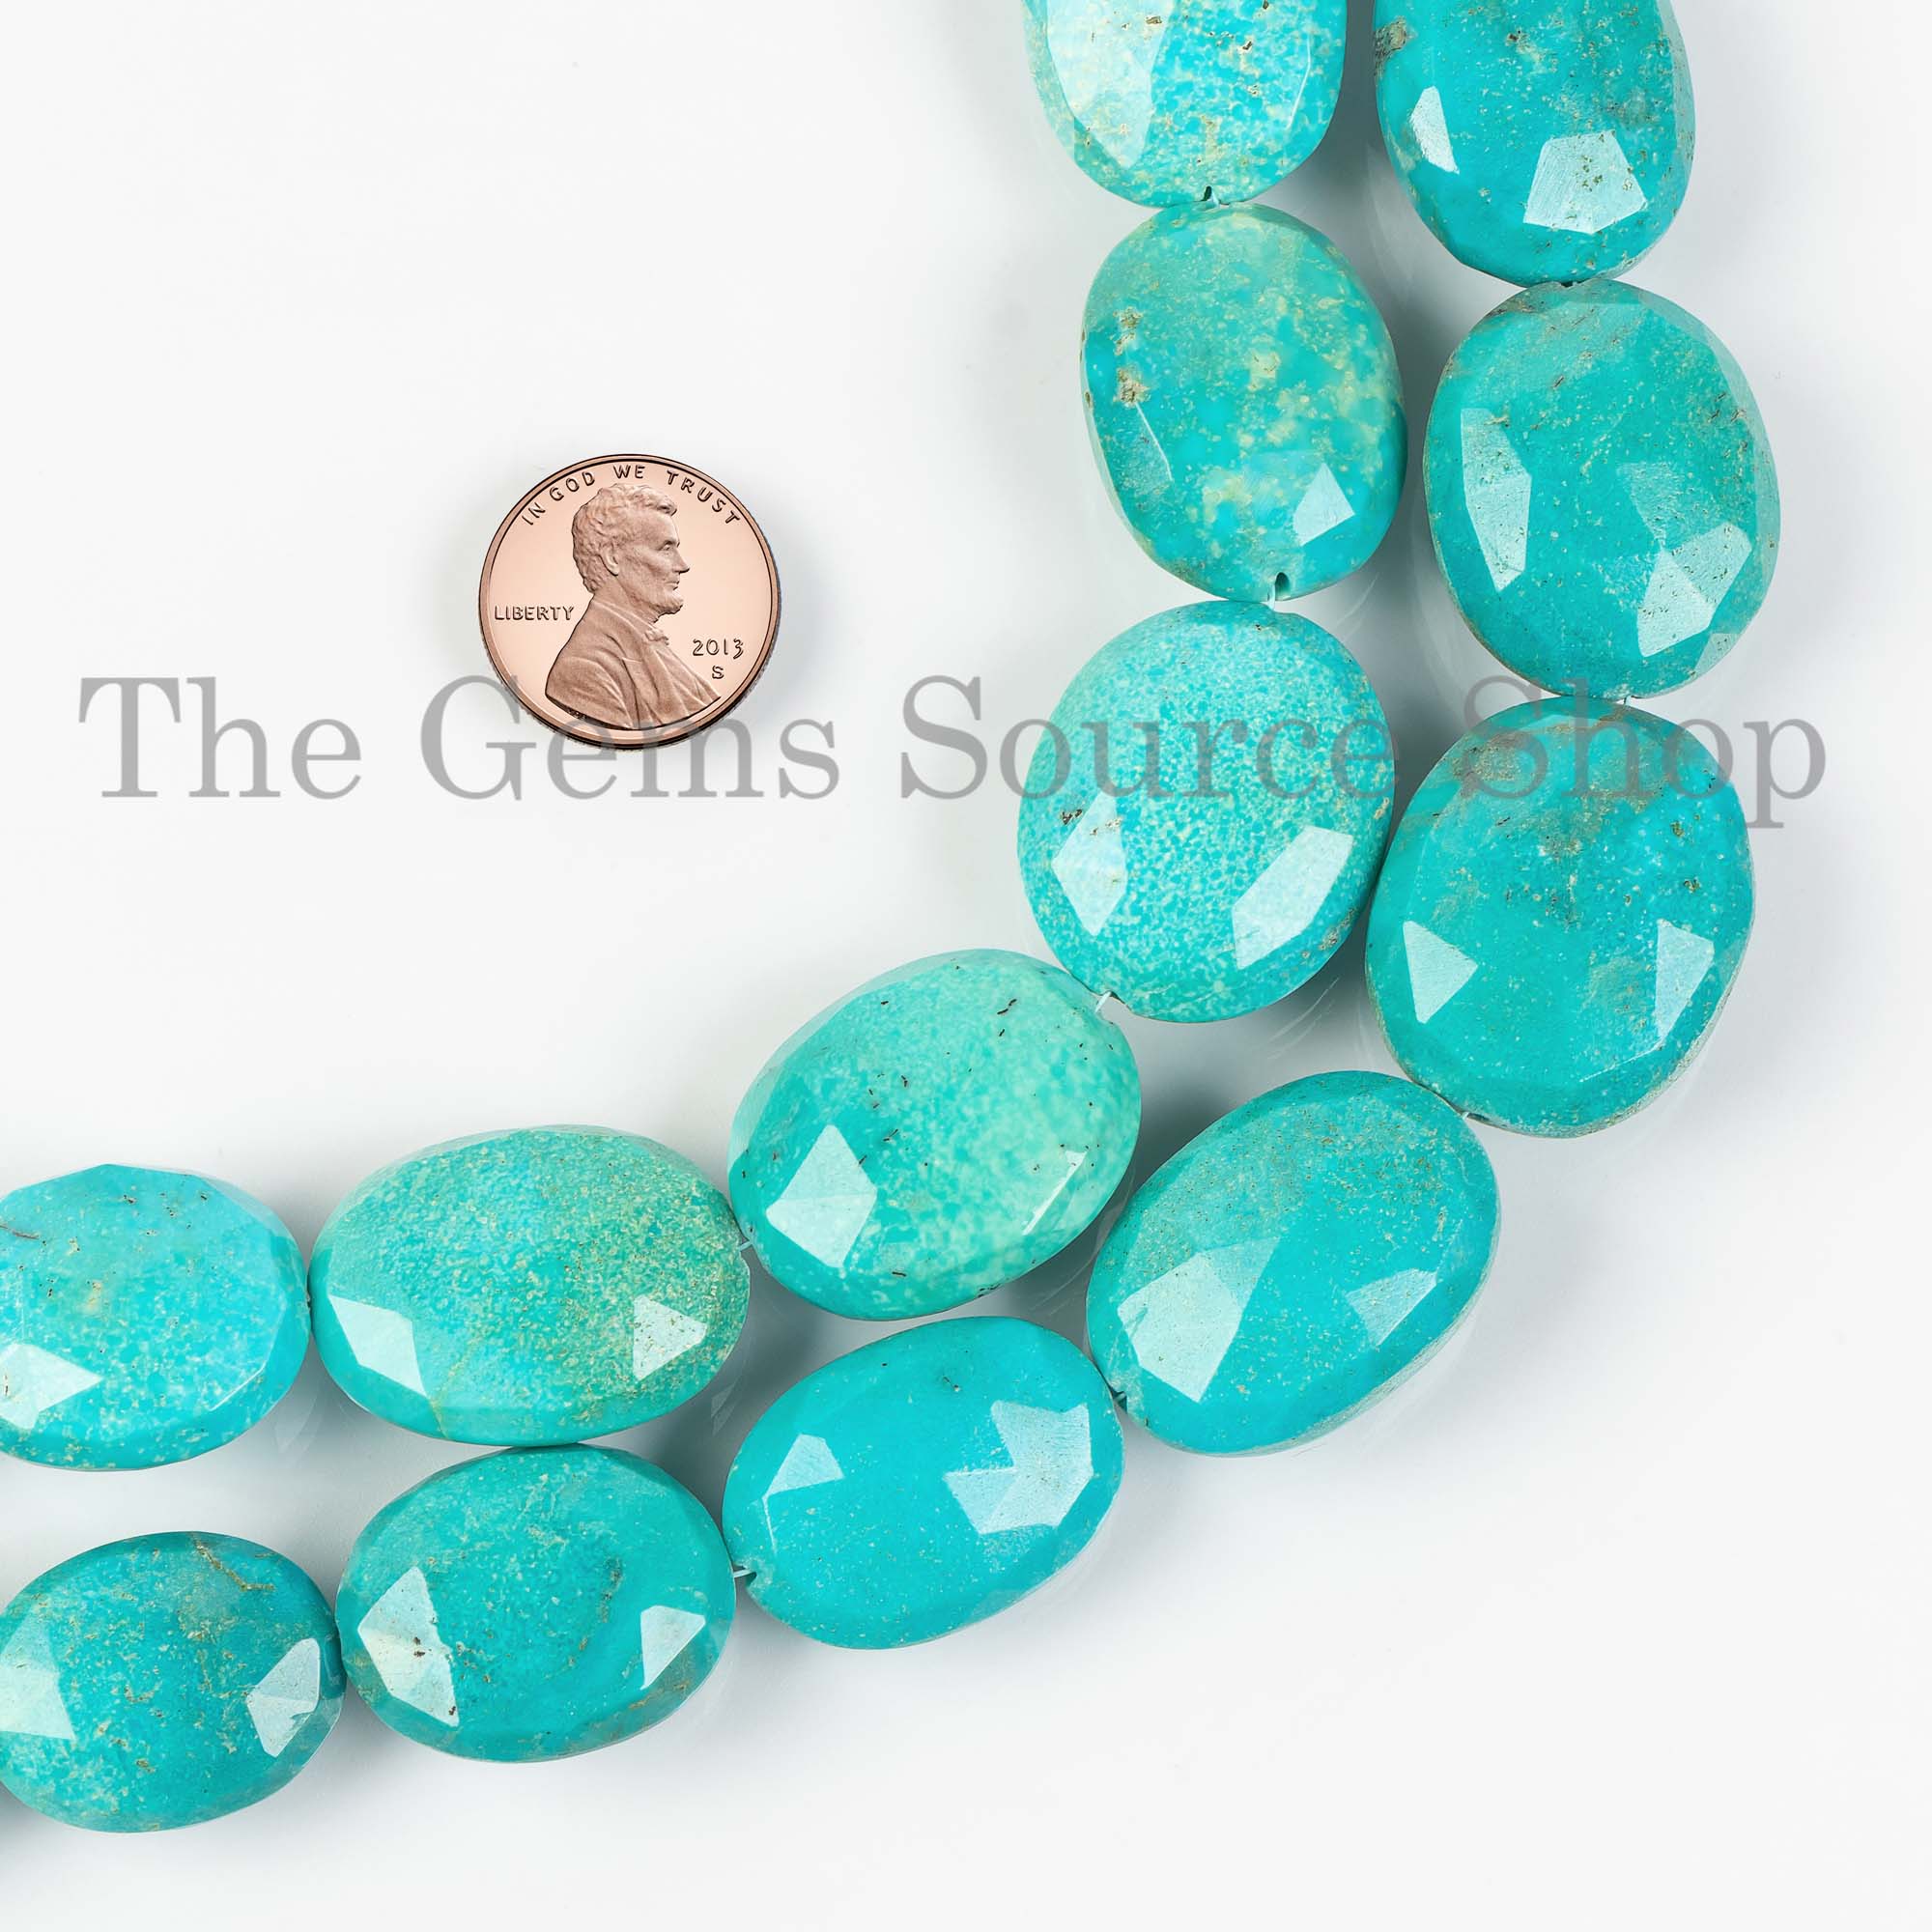 Turquoise Faceted Oval Briolette, Turquoise Beads, 16x21-20x25mm Faceted Turquoise Gemstone Beads, Turquoise Oval Beads, Turquoise Strand